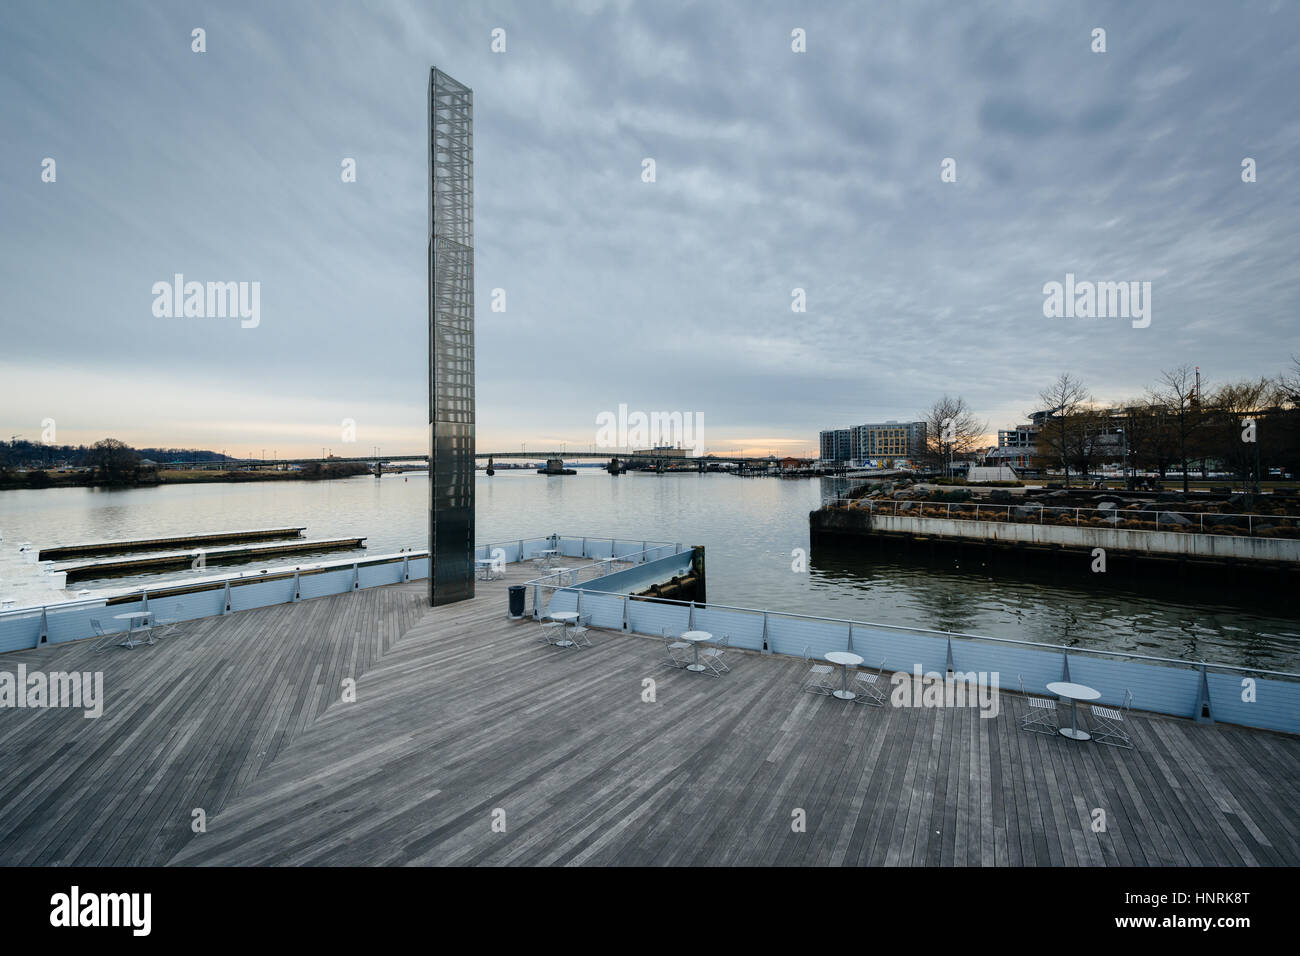 The Anacostia River, at The Yards Park, in Washington, DC. Stock Photo